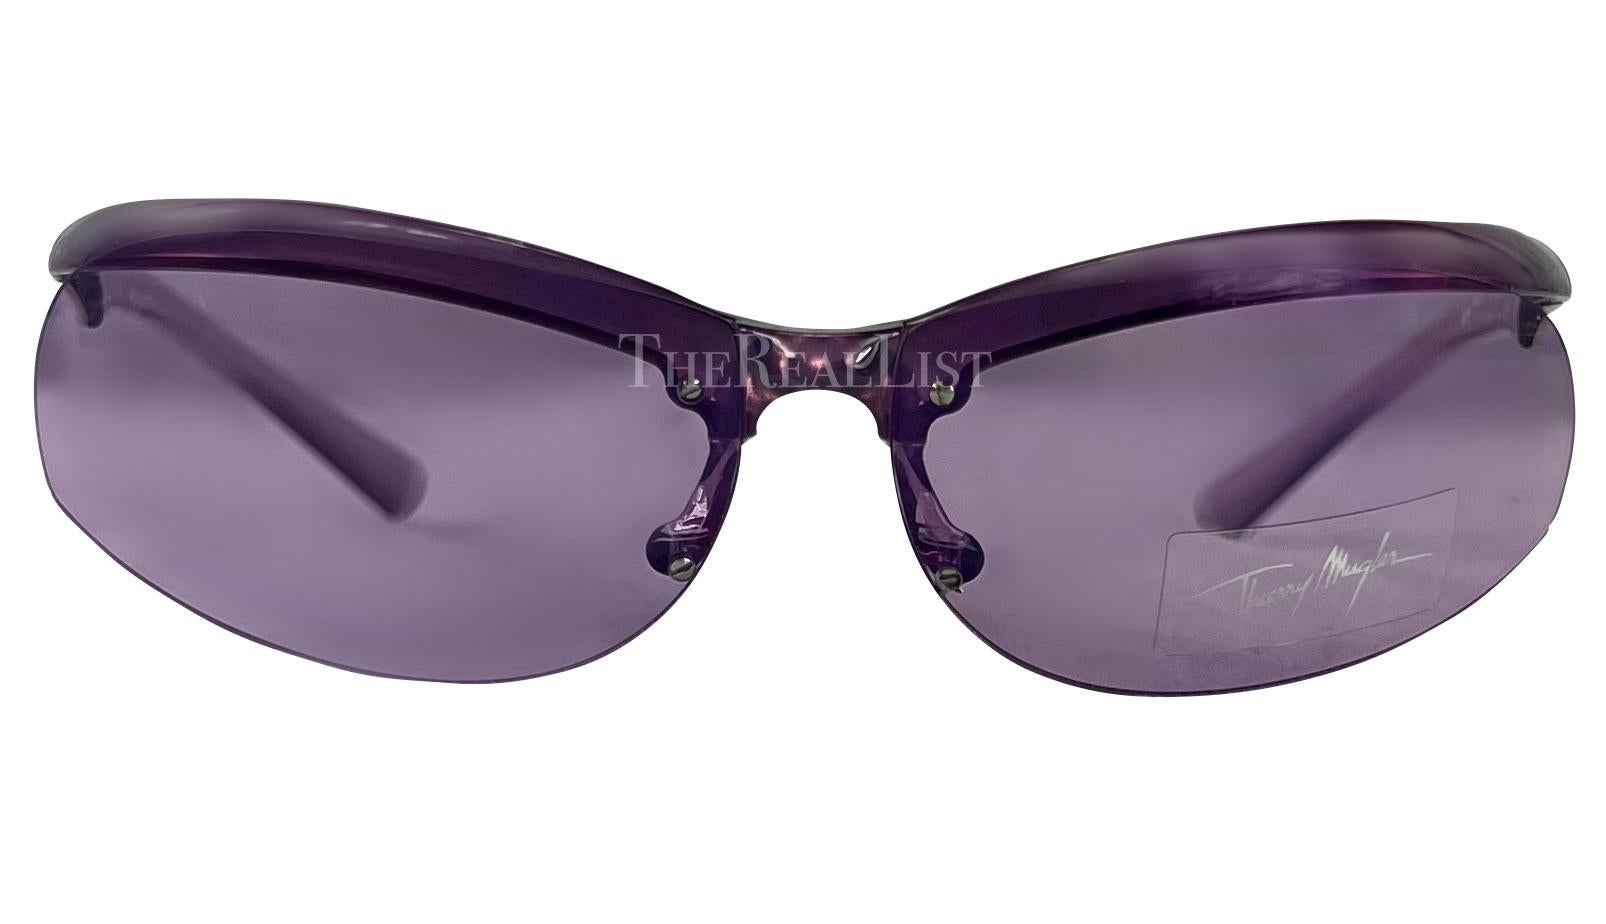 Presenting a pair of incredible purple Thierry Mugler sunglasses, designed by Manfred Mugler. From the early 2000s, these sporty biker-style sunglasses feature purple transparent arms and oval lenses. Never worn before, these sunglasses are made